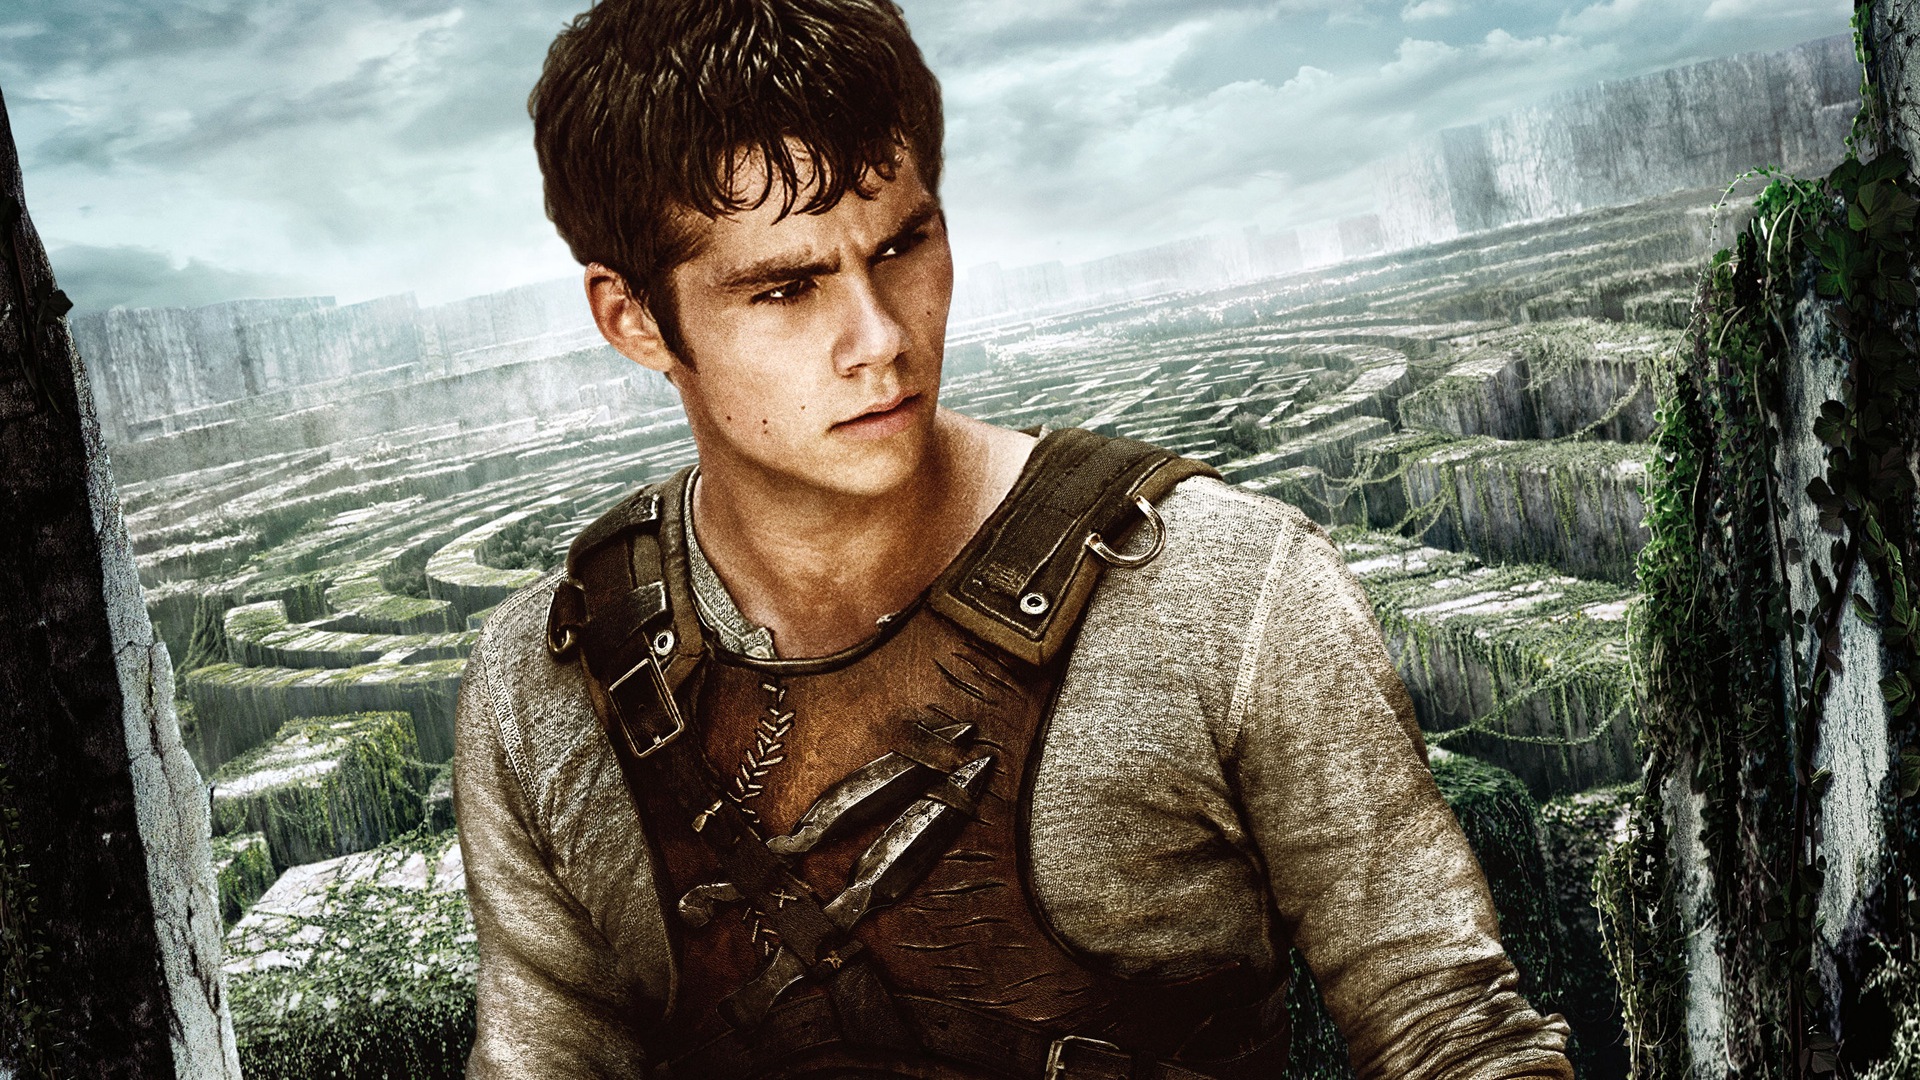 The Maze Runner HD movie wallpapers #7 - 1920x1080